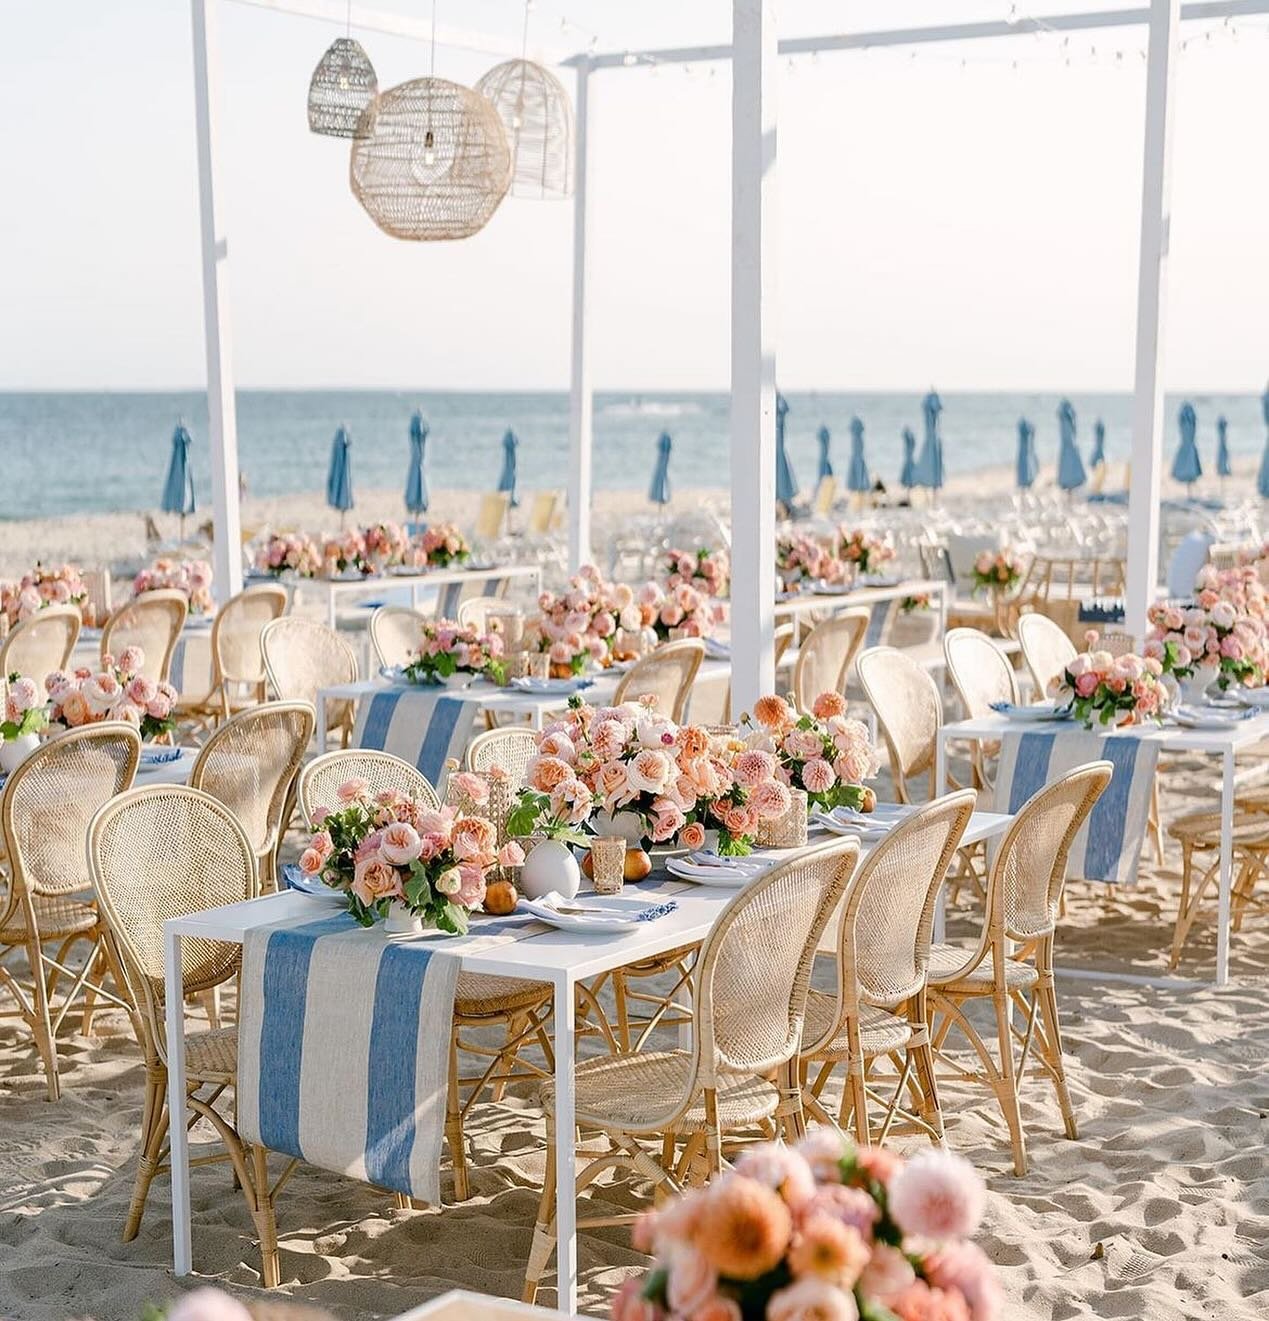 A quintessential New England soir&eacute;e at @oceanhouseri - Picture soft sands, the gentle sound of waves, and a warm breeze carrying the scent of peach, pink, and coral flowers. Tables adorned with delicate blooms and seasonal fruit paired with so